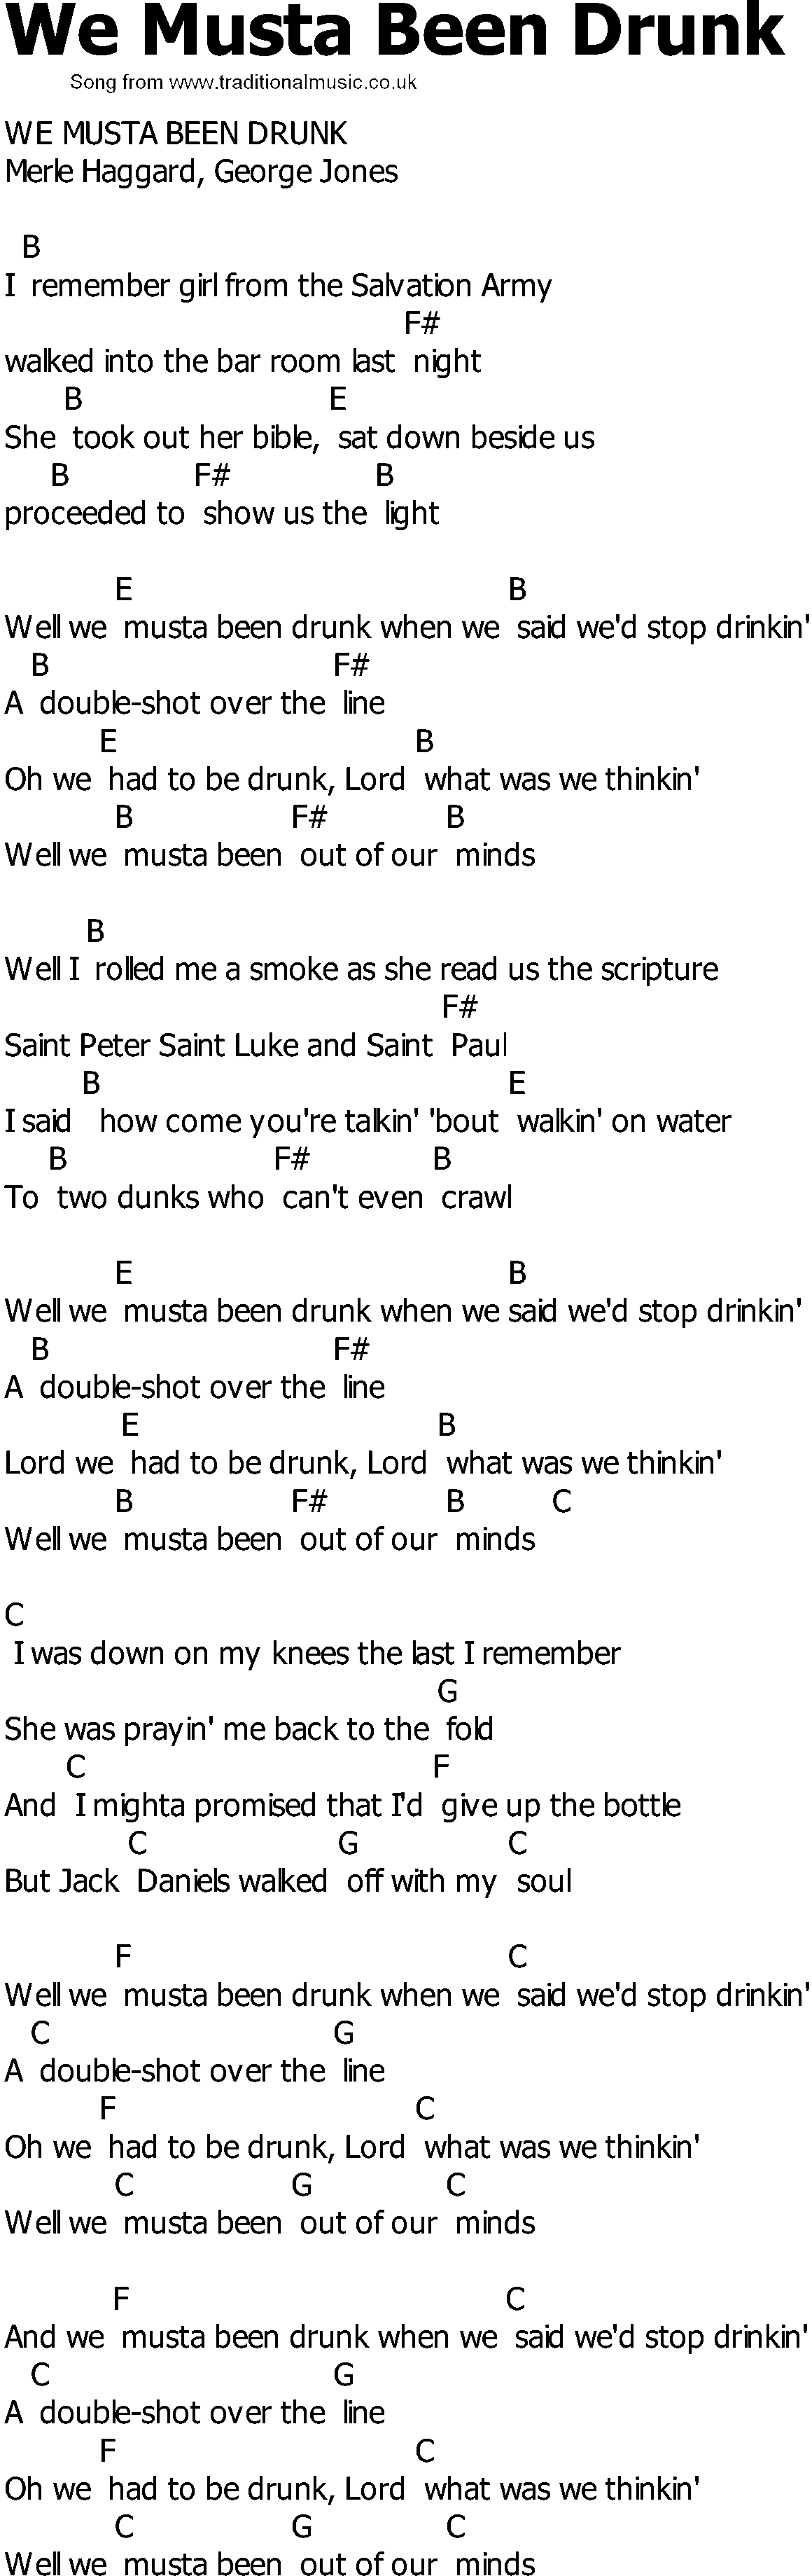 Old Country song lyrics with chords - We Musta Been Drunk